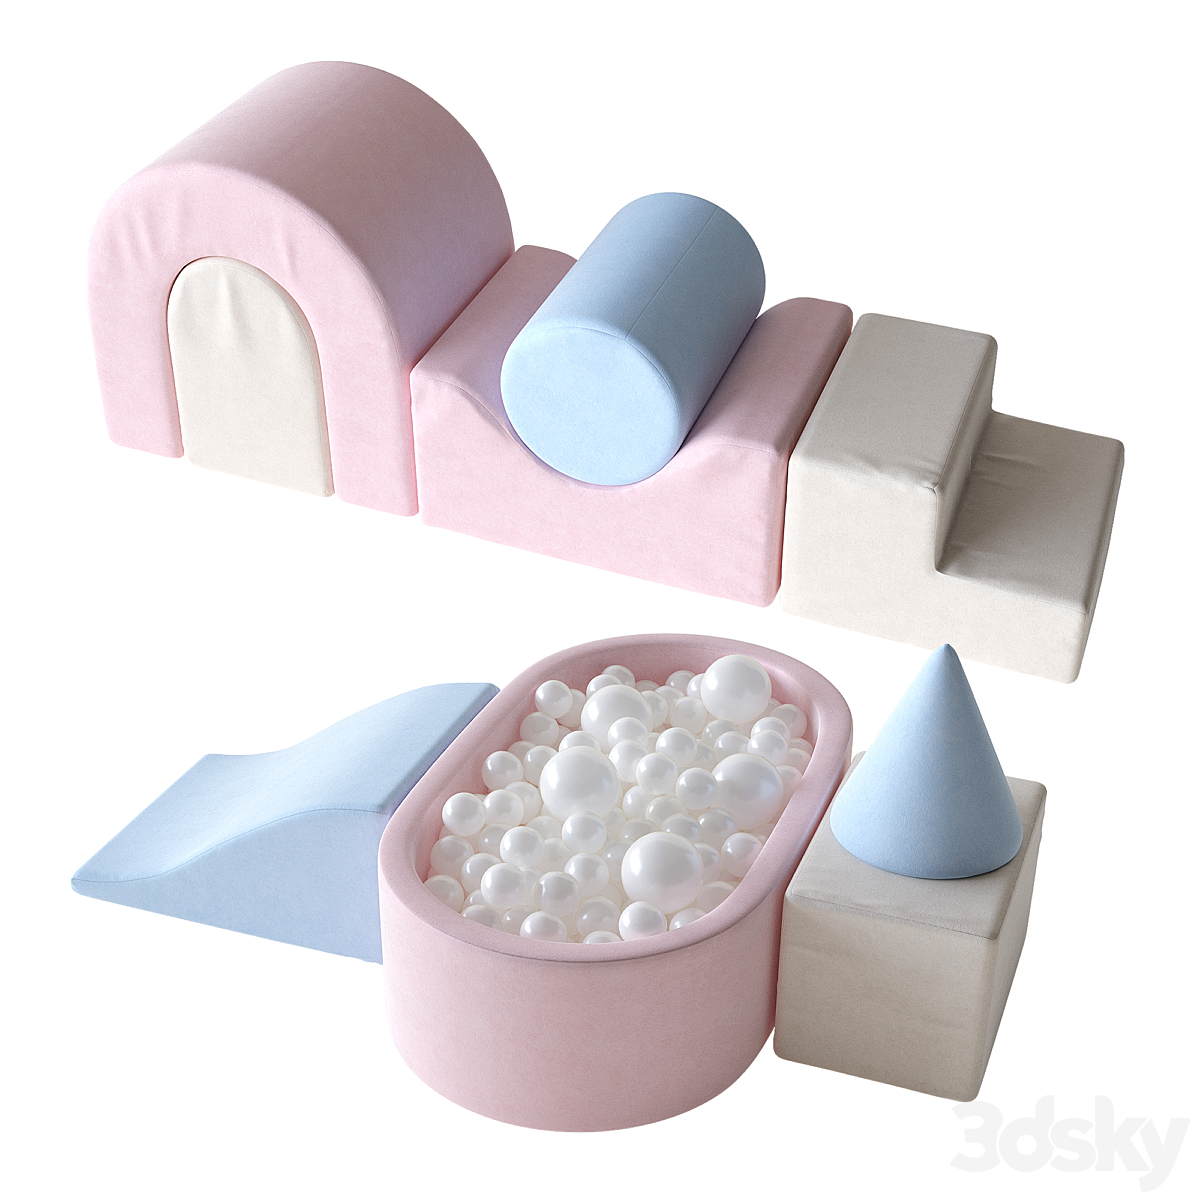 KIDKII Lux Foam Play Set with Ball Pit for kids and cute little penguins